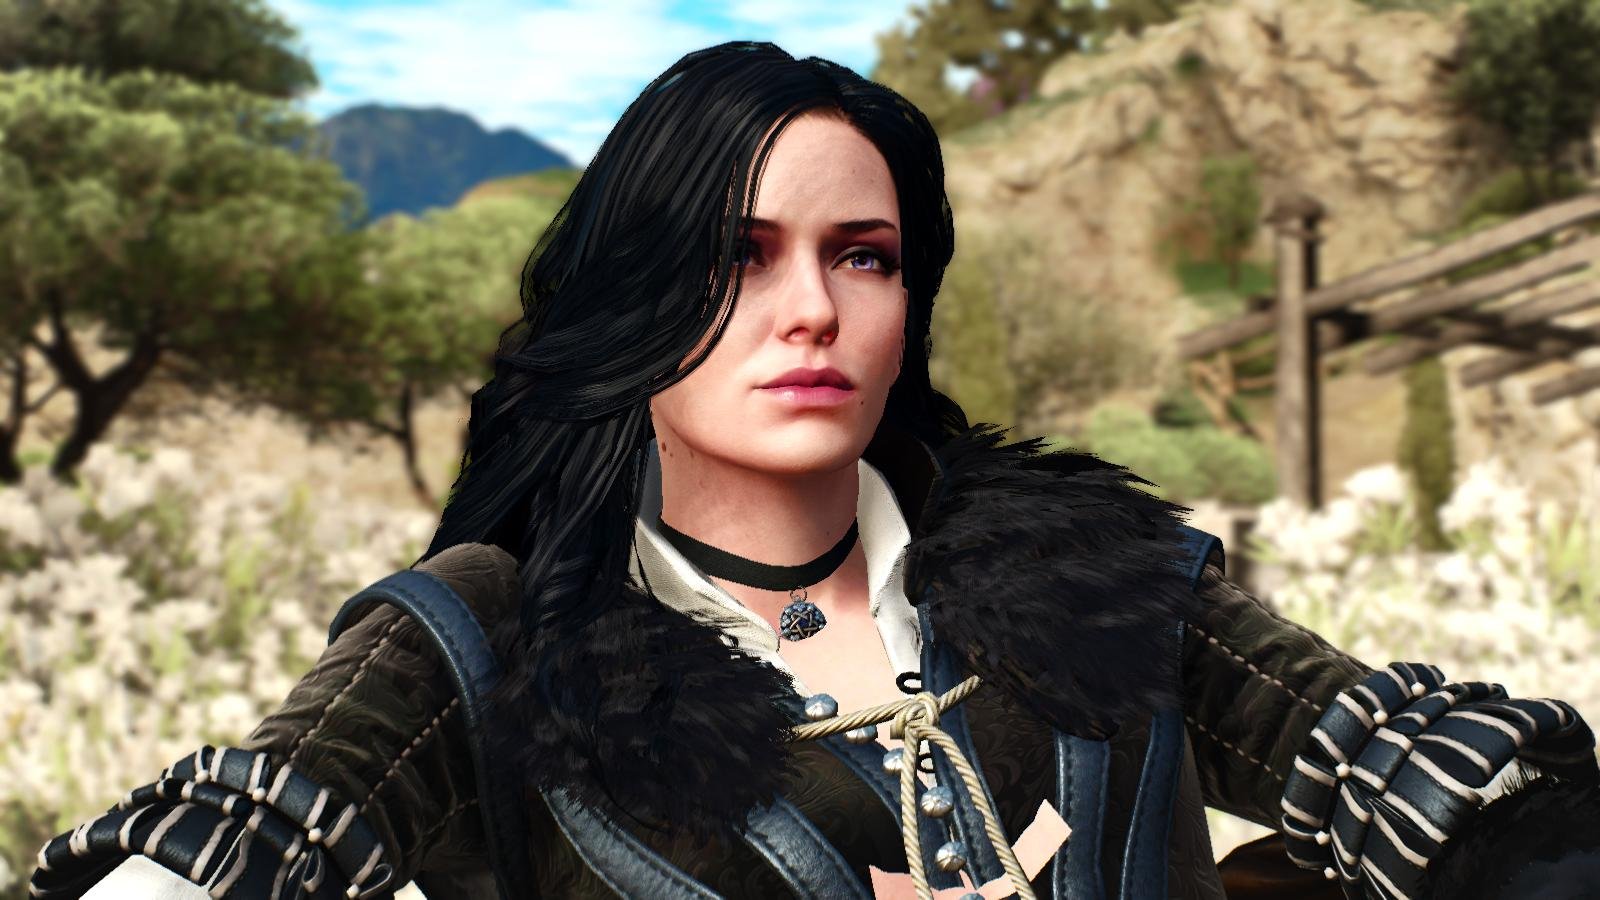 Yennefer of vengerberg the witcher 3 voiced standalone follower se фото 12